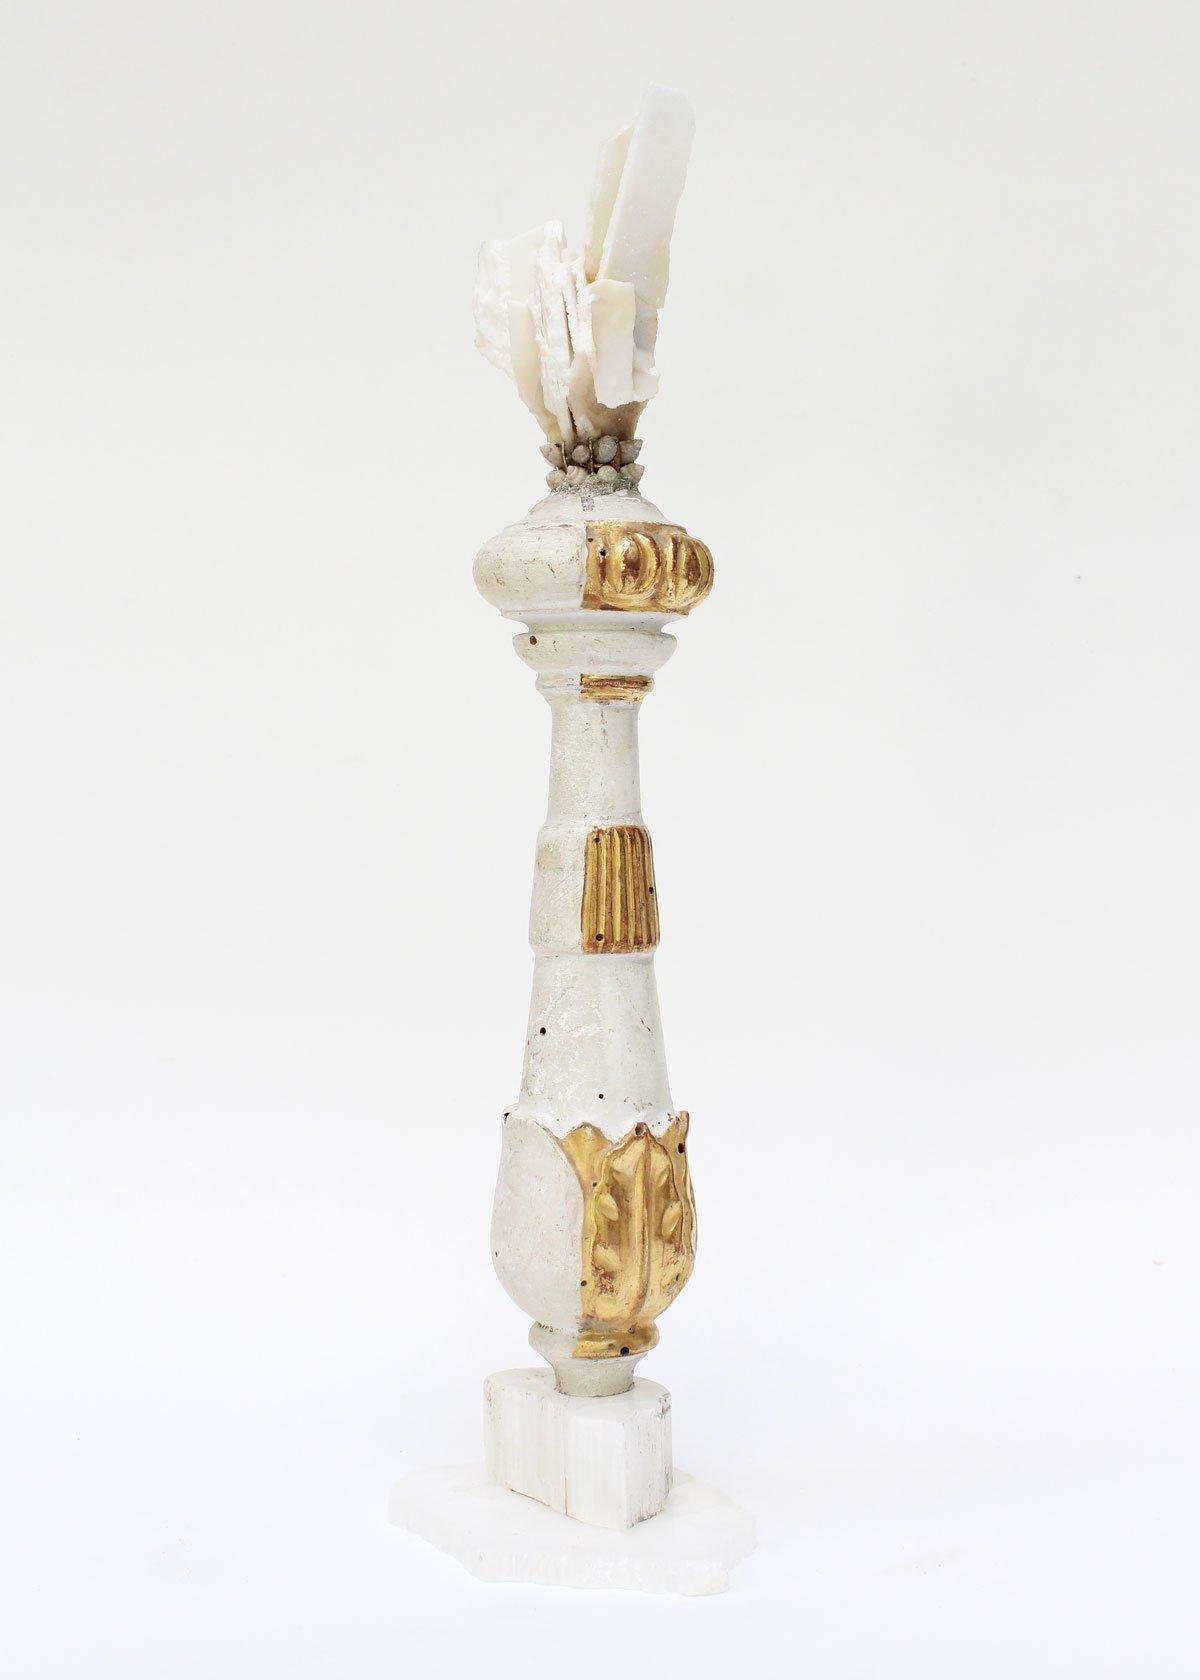 Carved 18th Century Italian Candlestick with Angle Plated Quartz & Pearl on Selenite